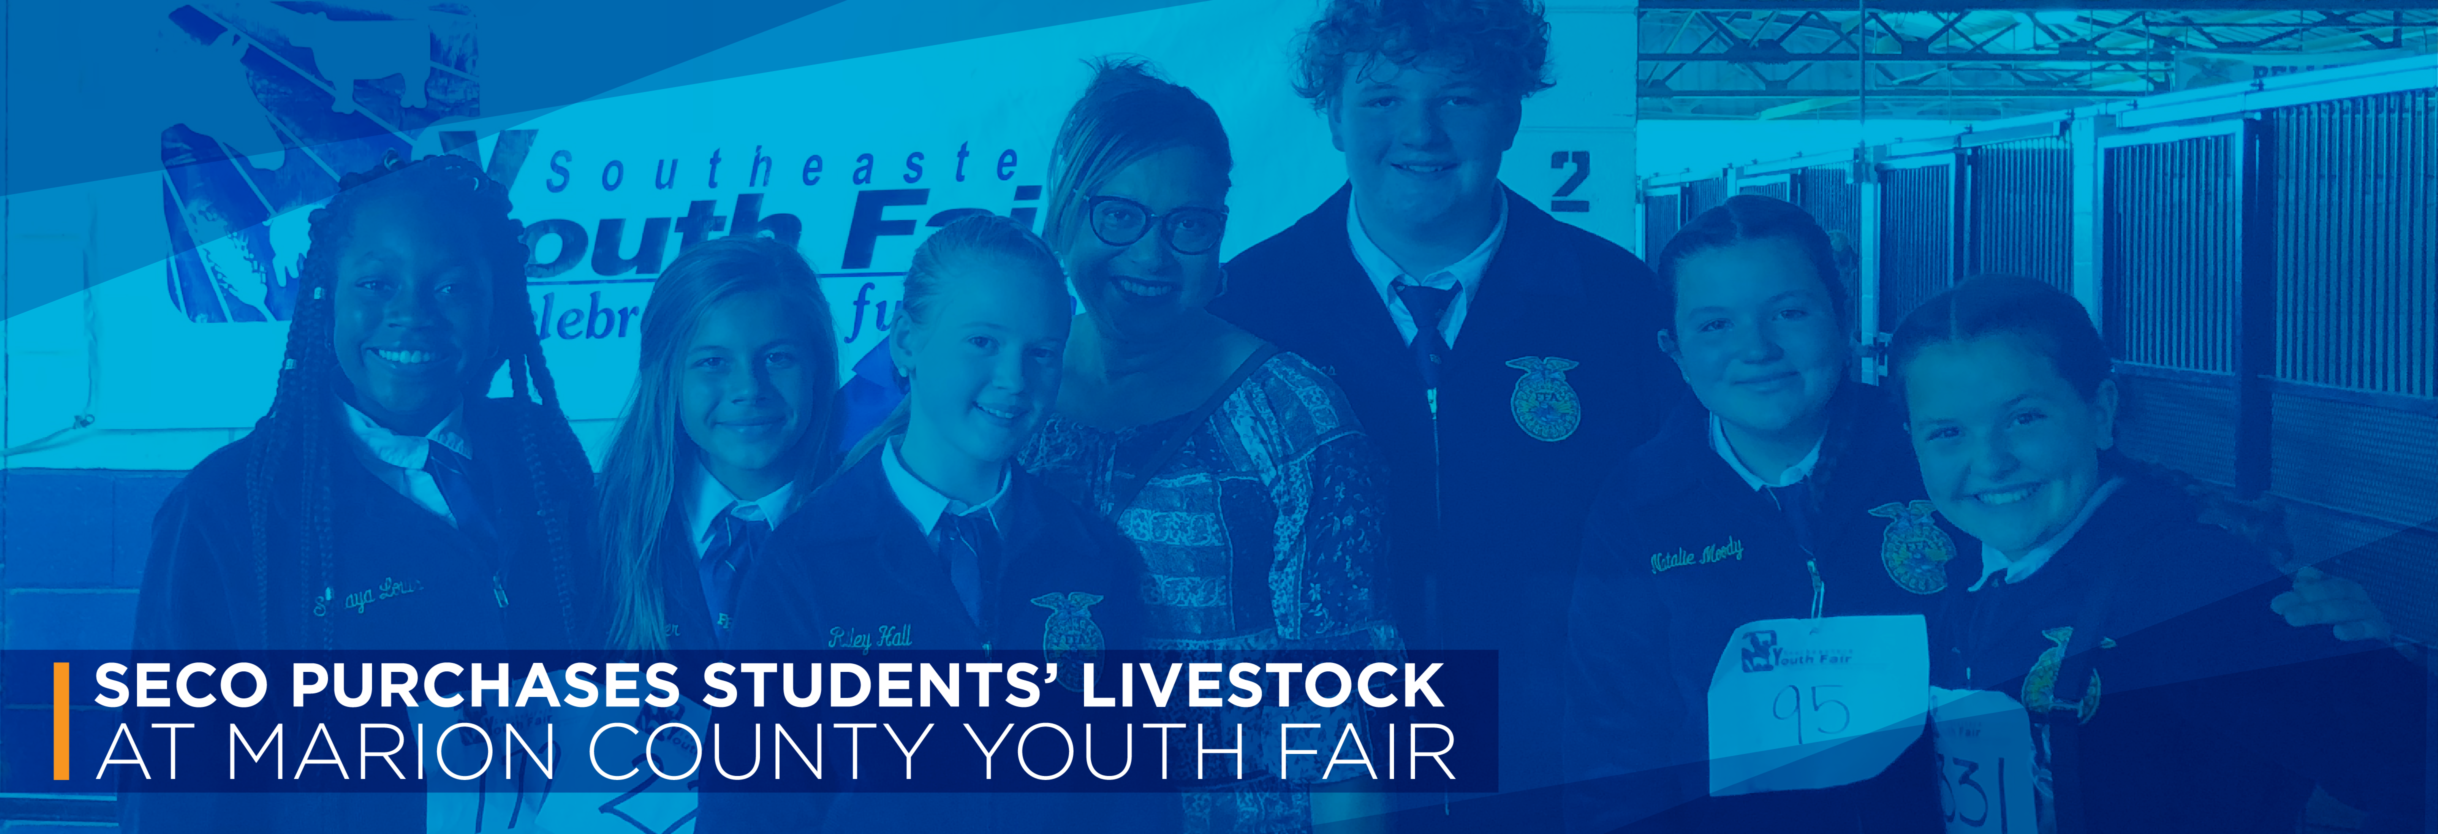 SECO Purchases Students’ Livestock at Marion County Youth Fair